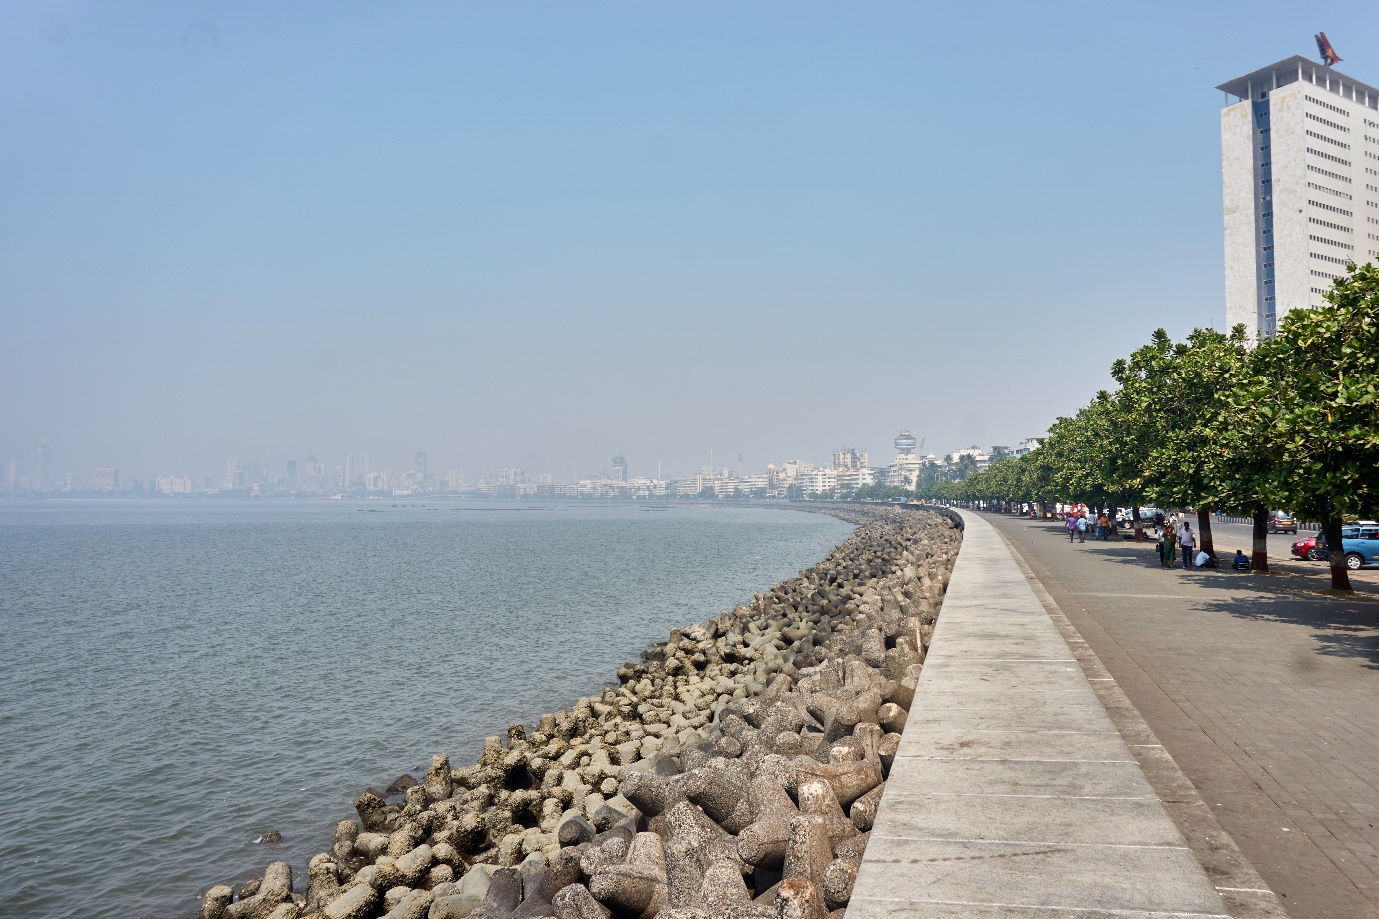 5 Ways to Make the Most of Your Mumbai Trip